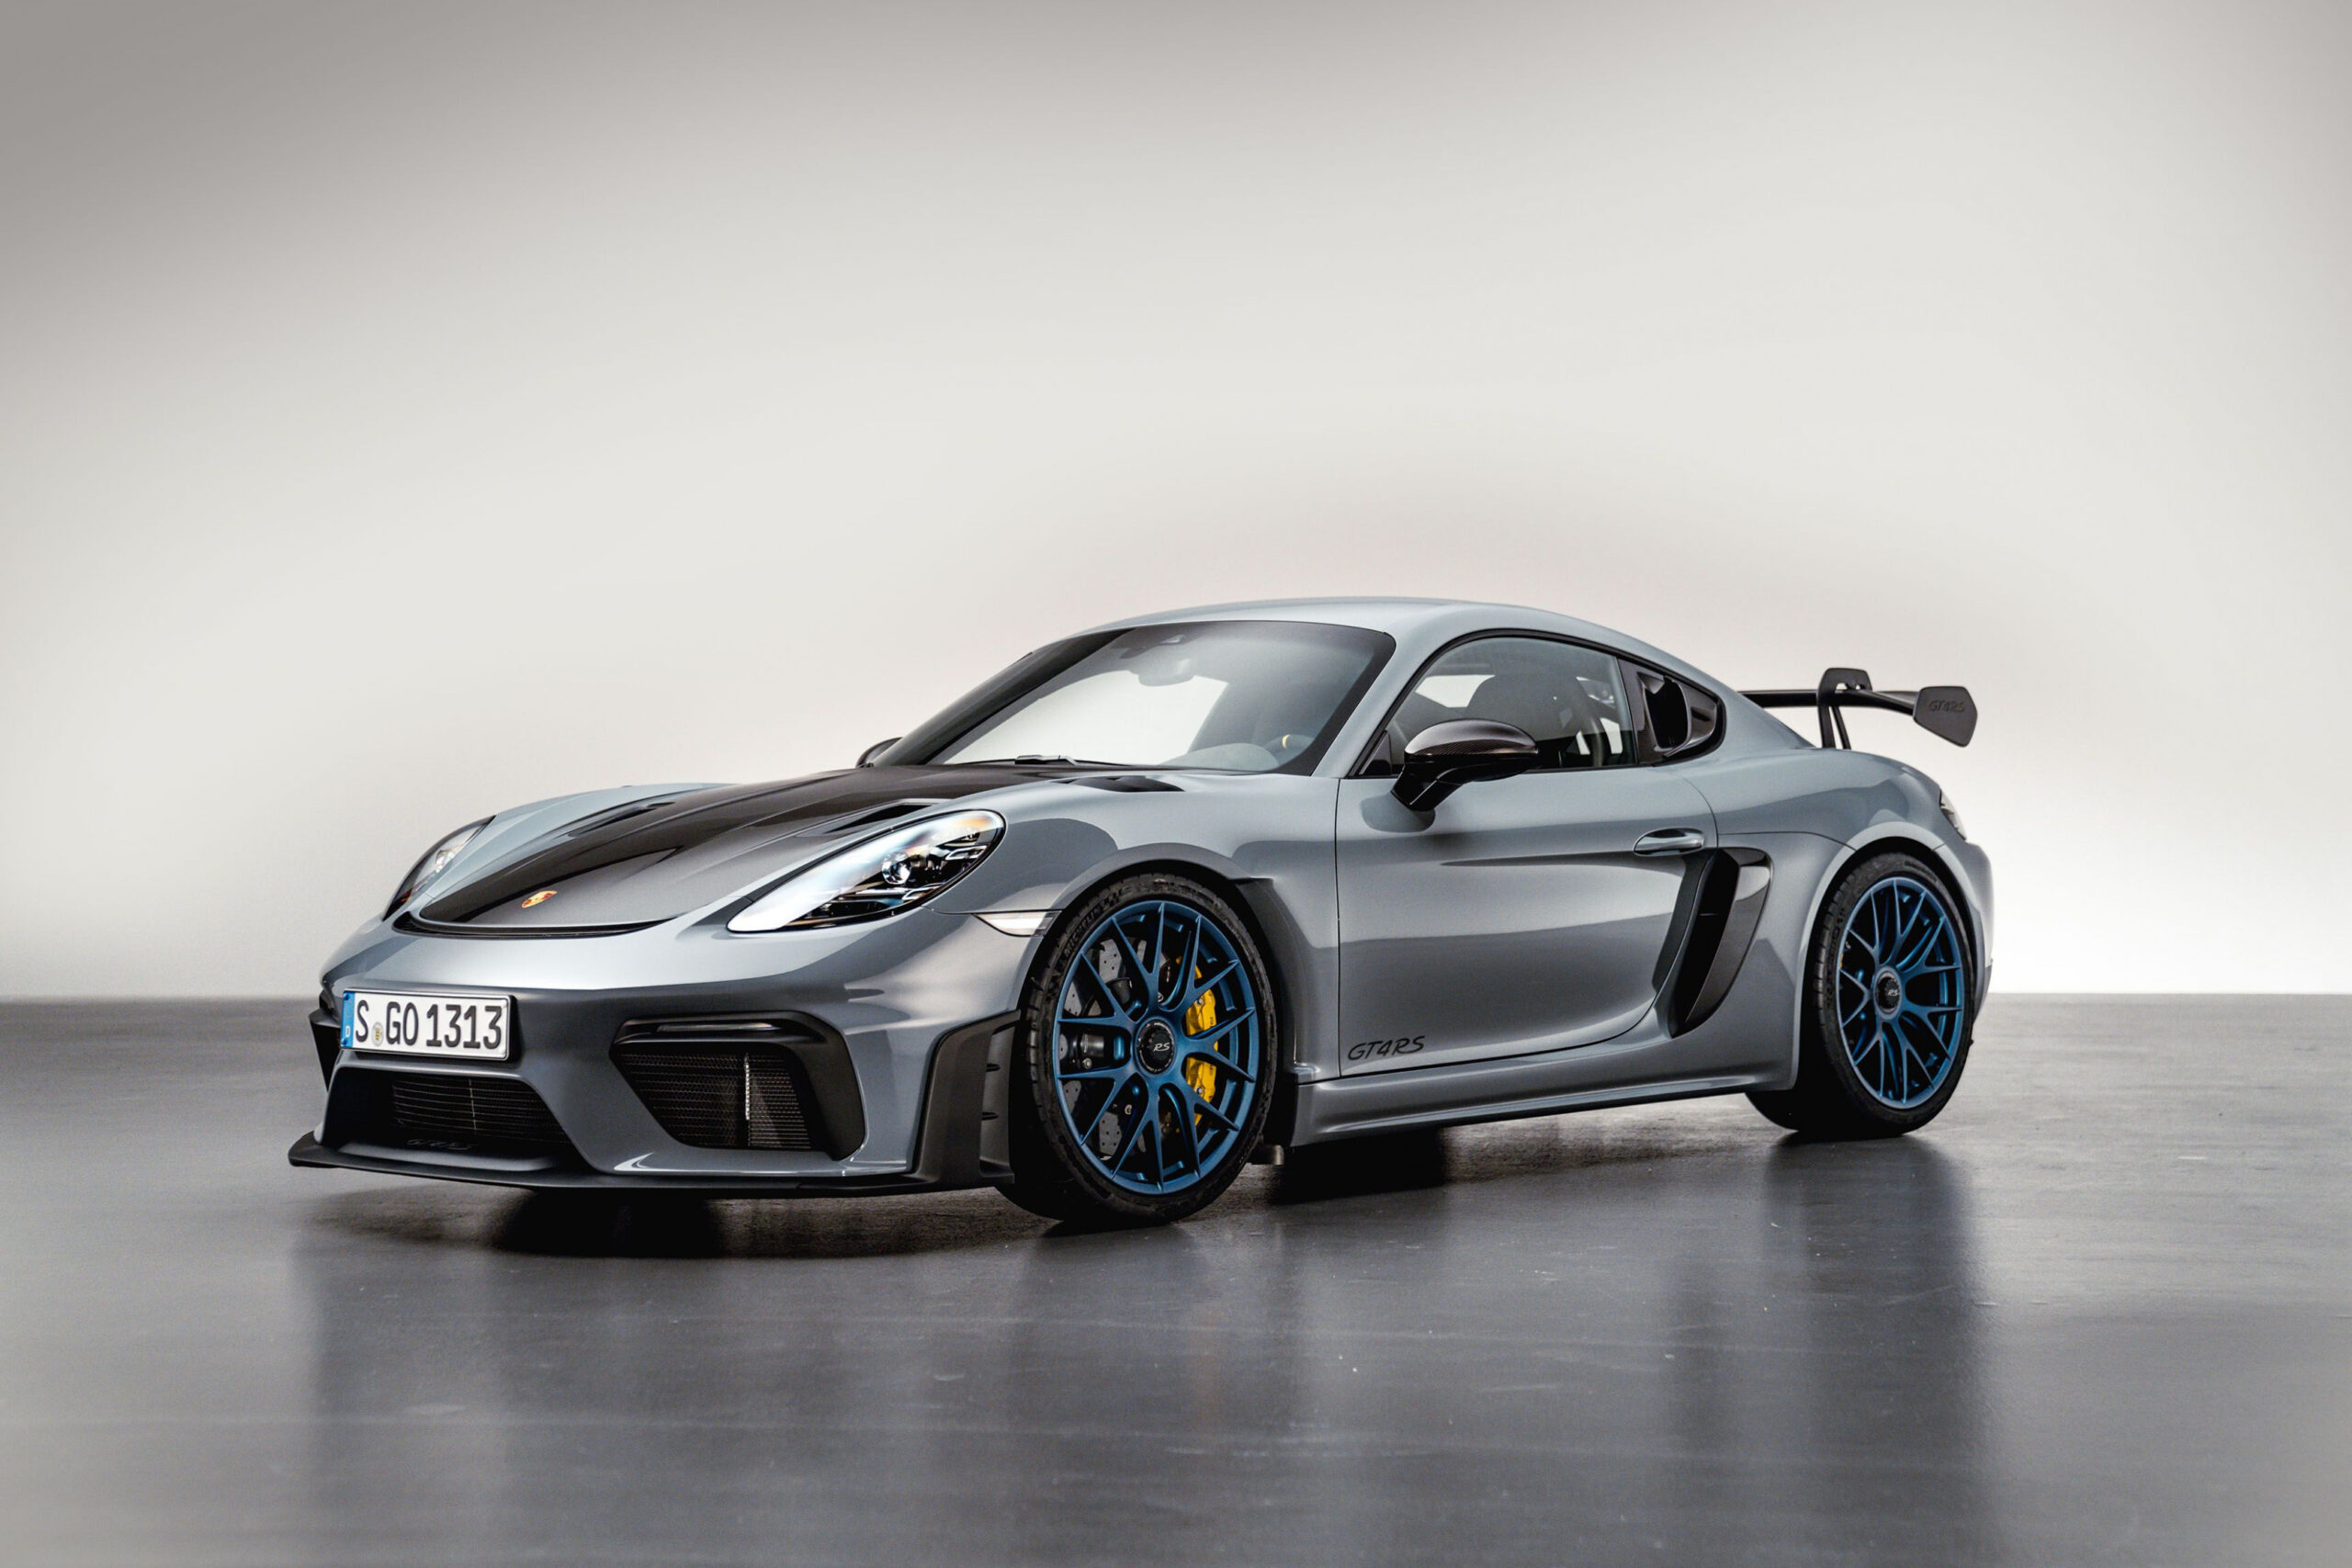 5 Porsche 5 Cayman Gt5 Rs: Everything You Need To Know 2023 Porsche 718 Cayman Gt4